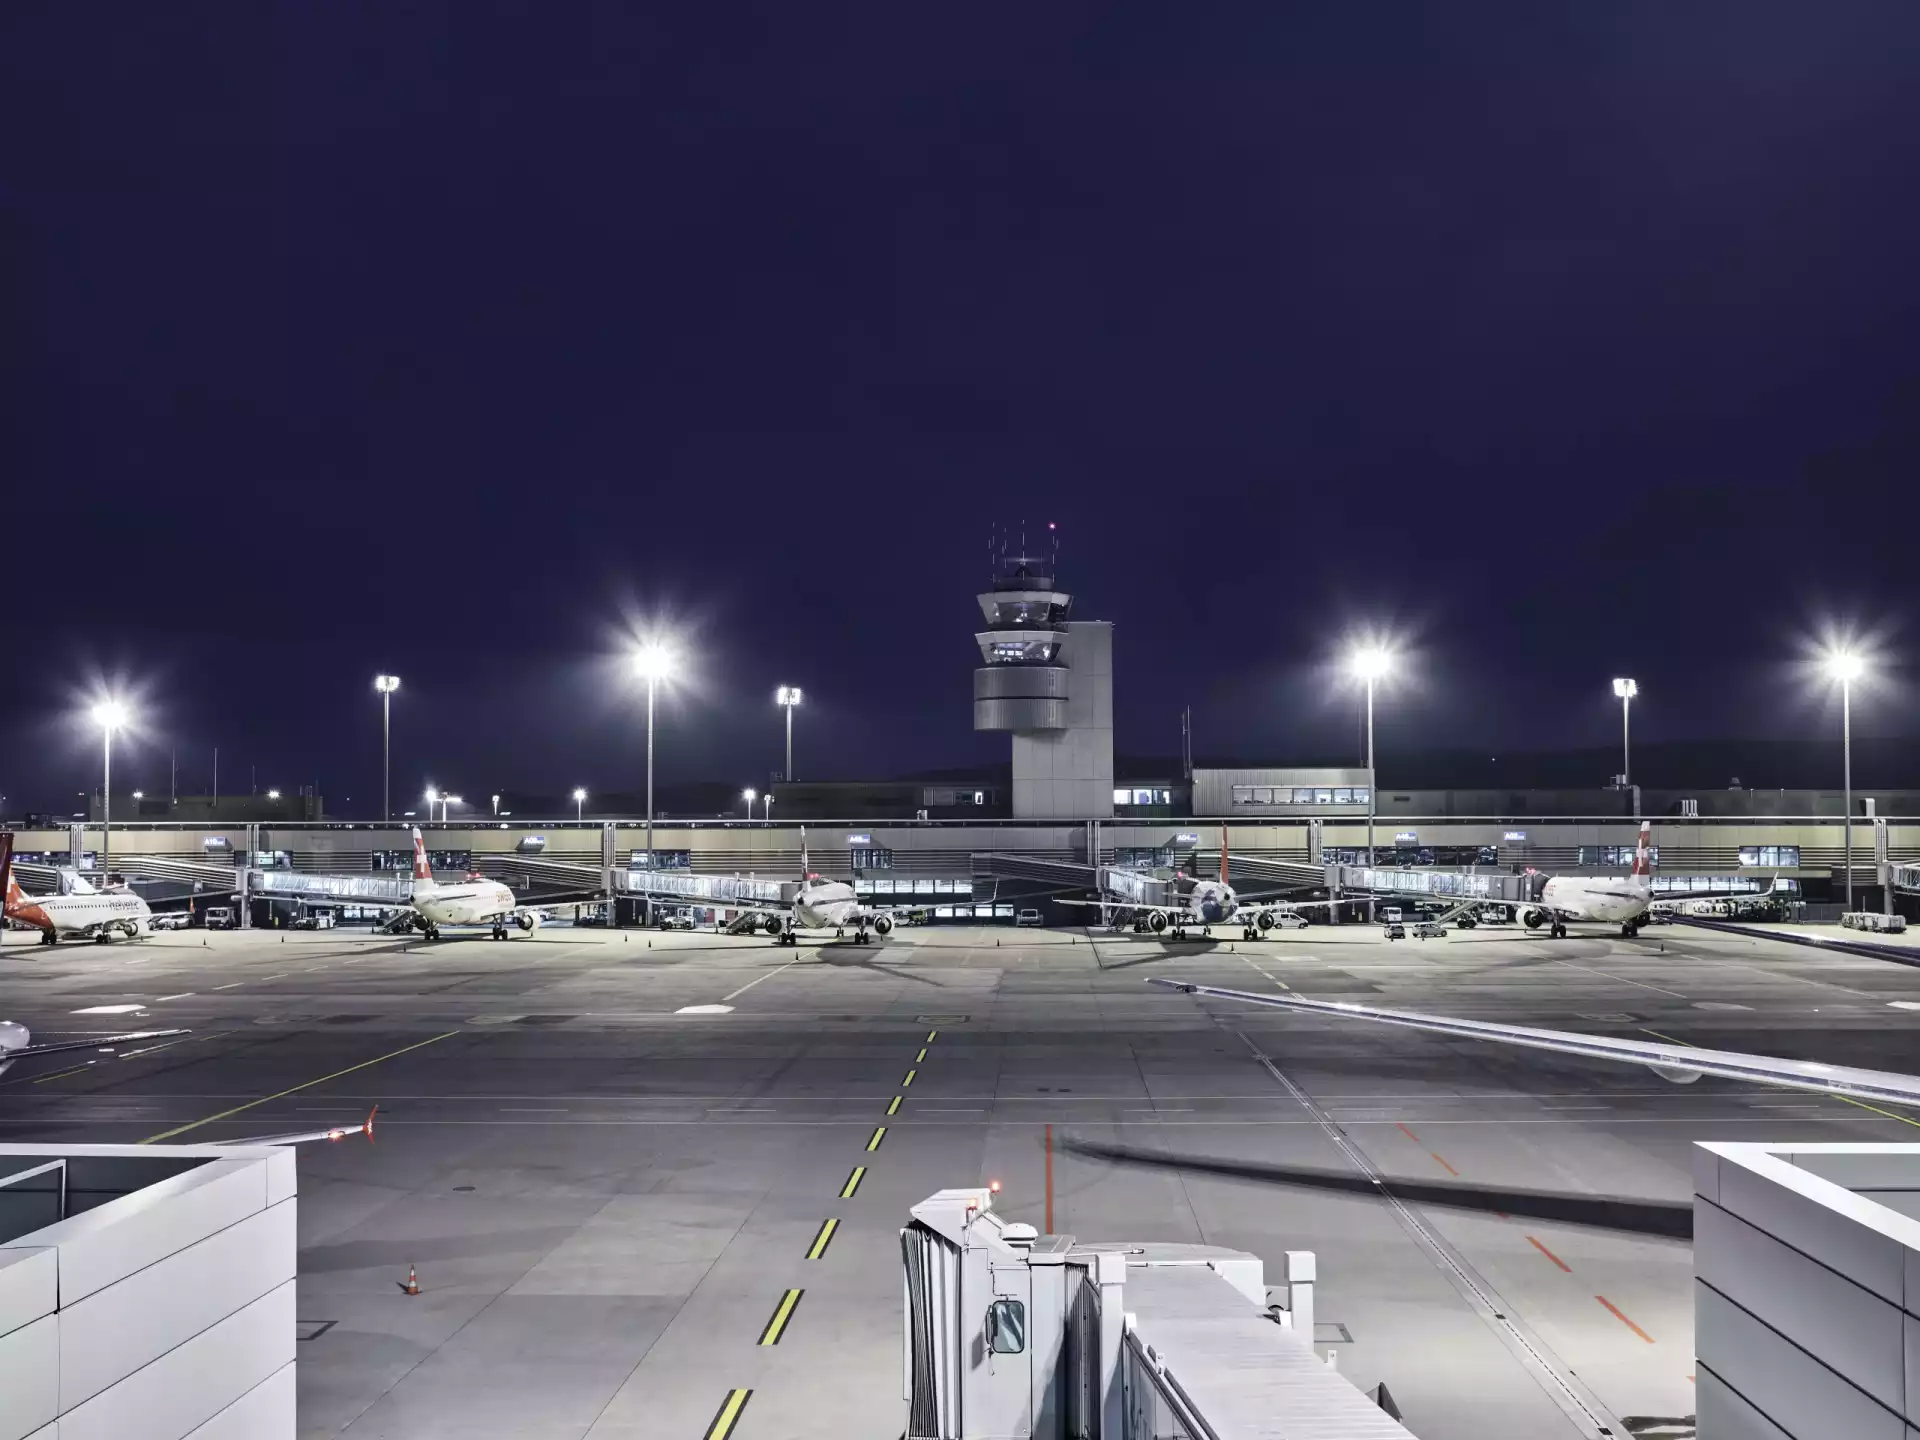 Control tower at Zurich airport at night